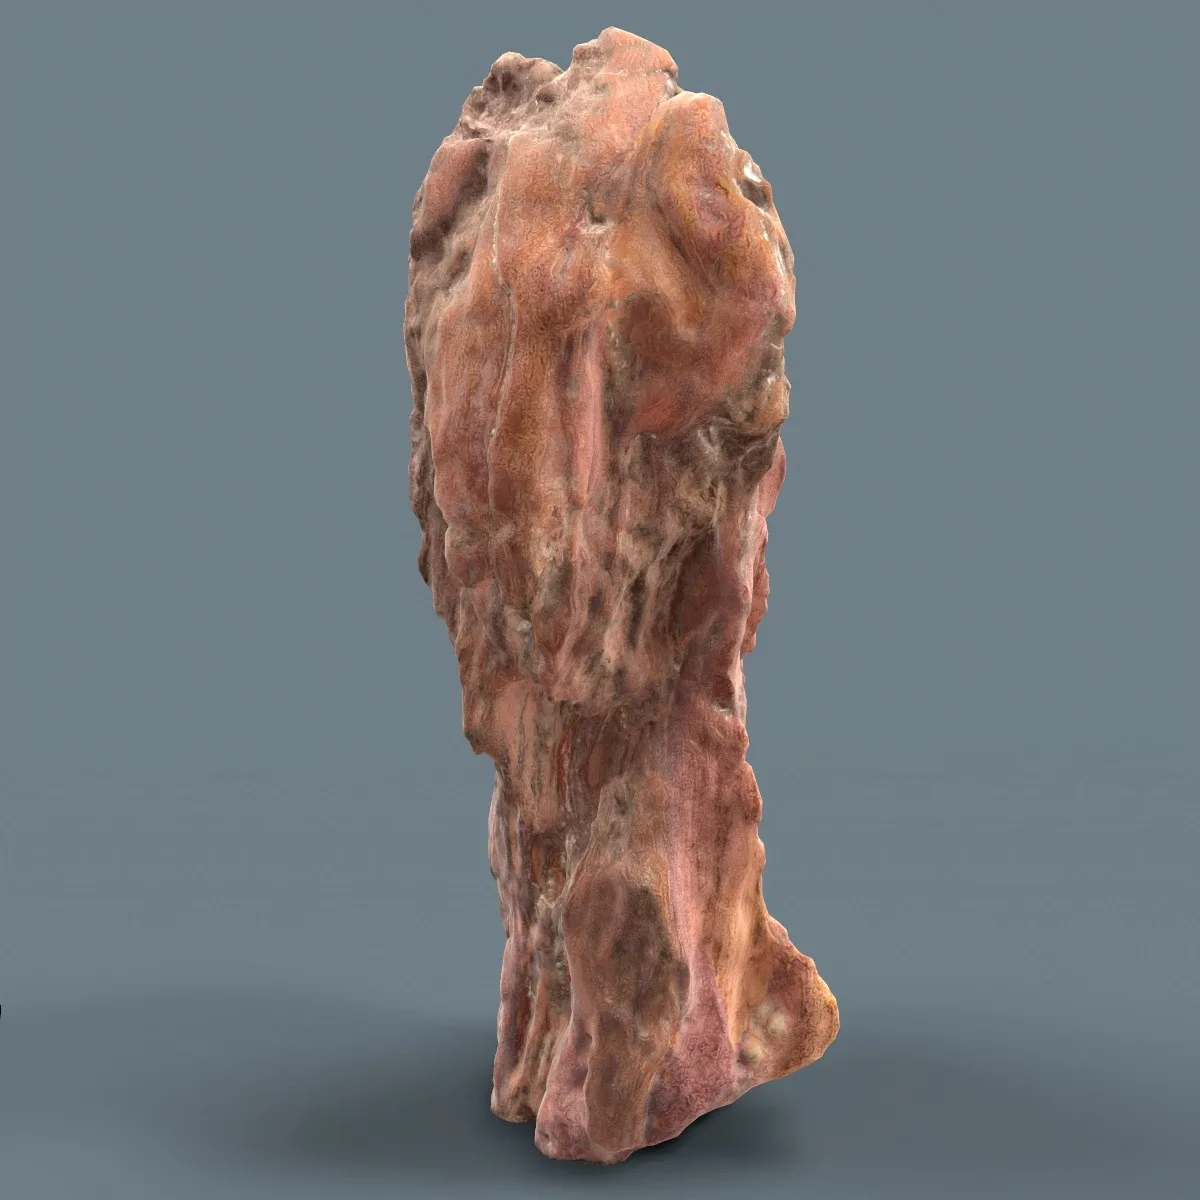 Suiseki Stone 26 from Japan - High-Quality 3D Model with Metallic-Roughness PBR Textures for Games, VR, and Art Projects